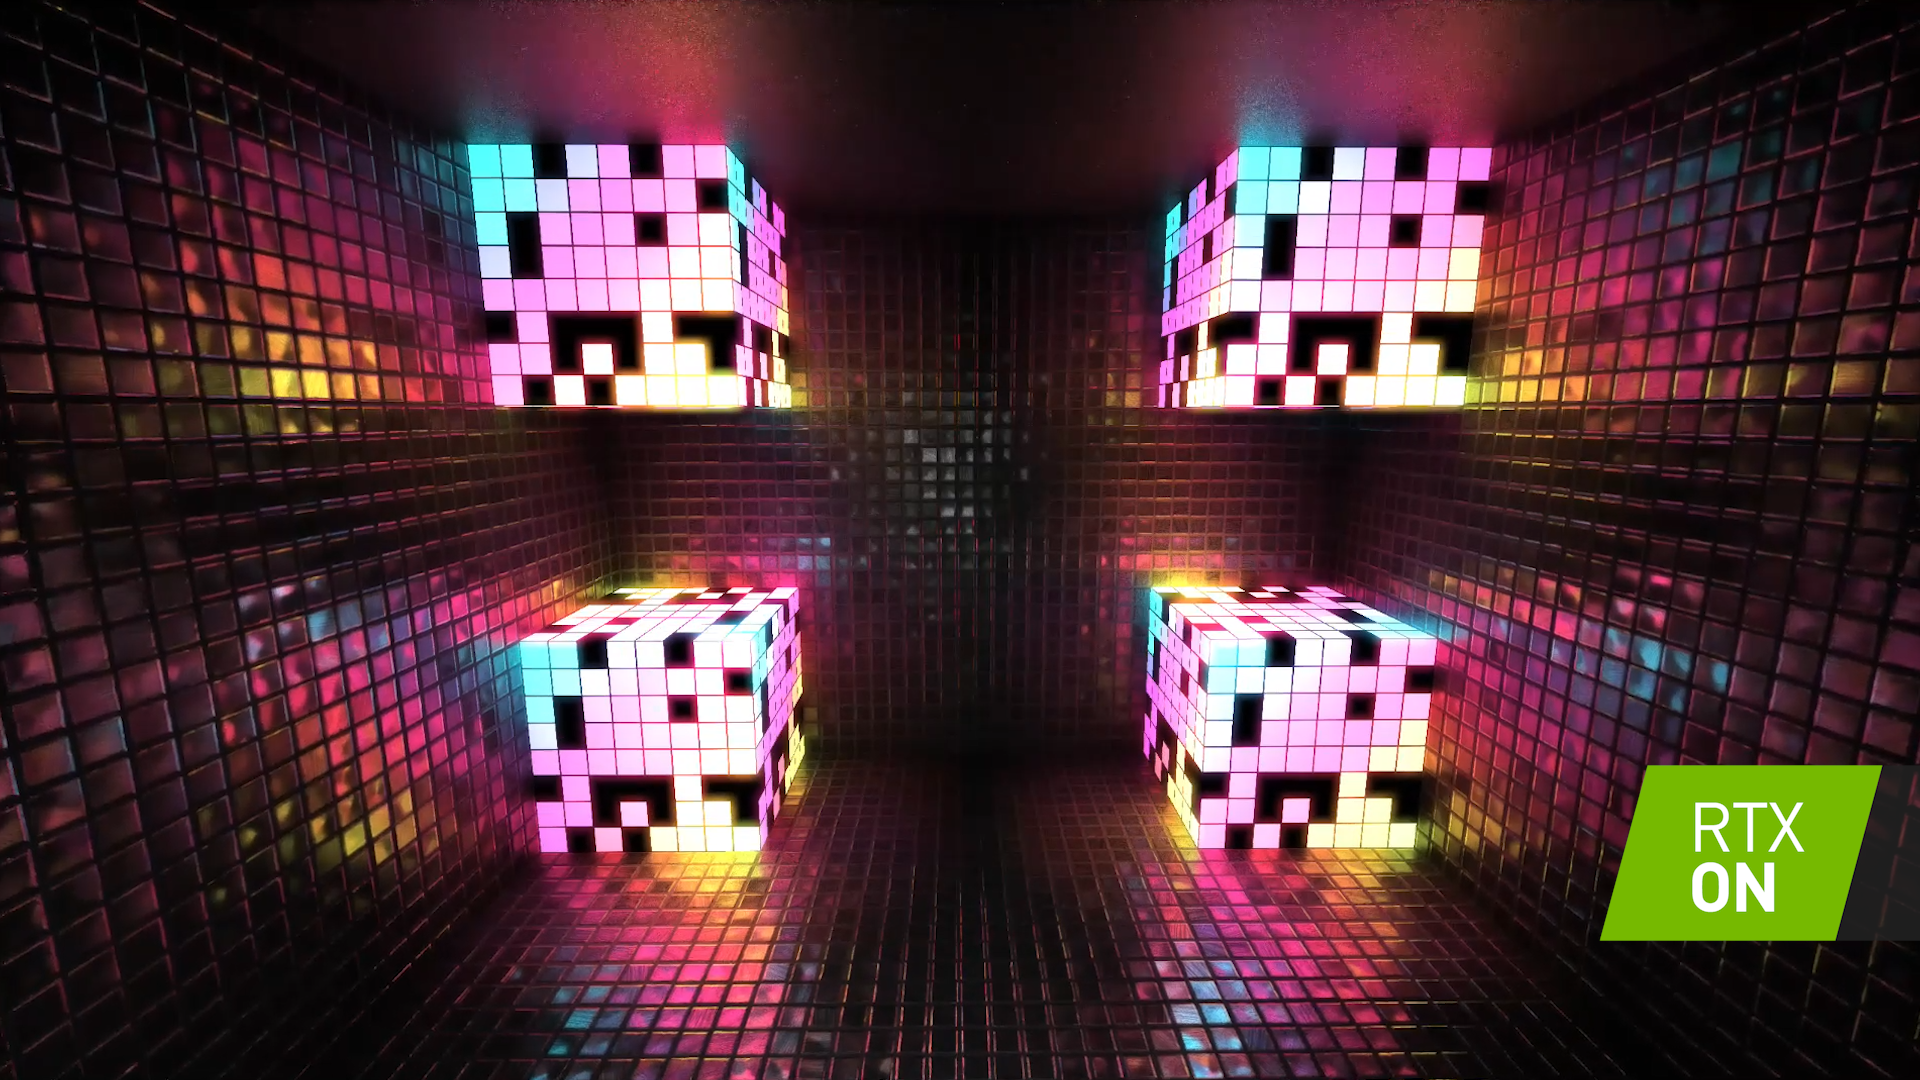 There are now 2 different Minecraft ray tracing demos, but no word